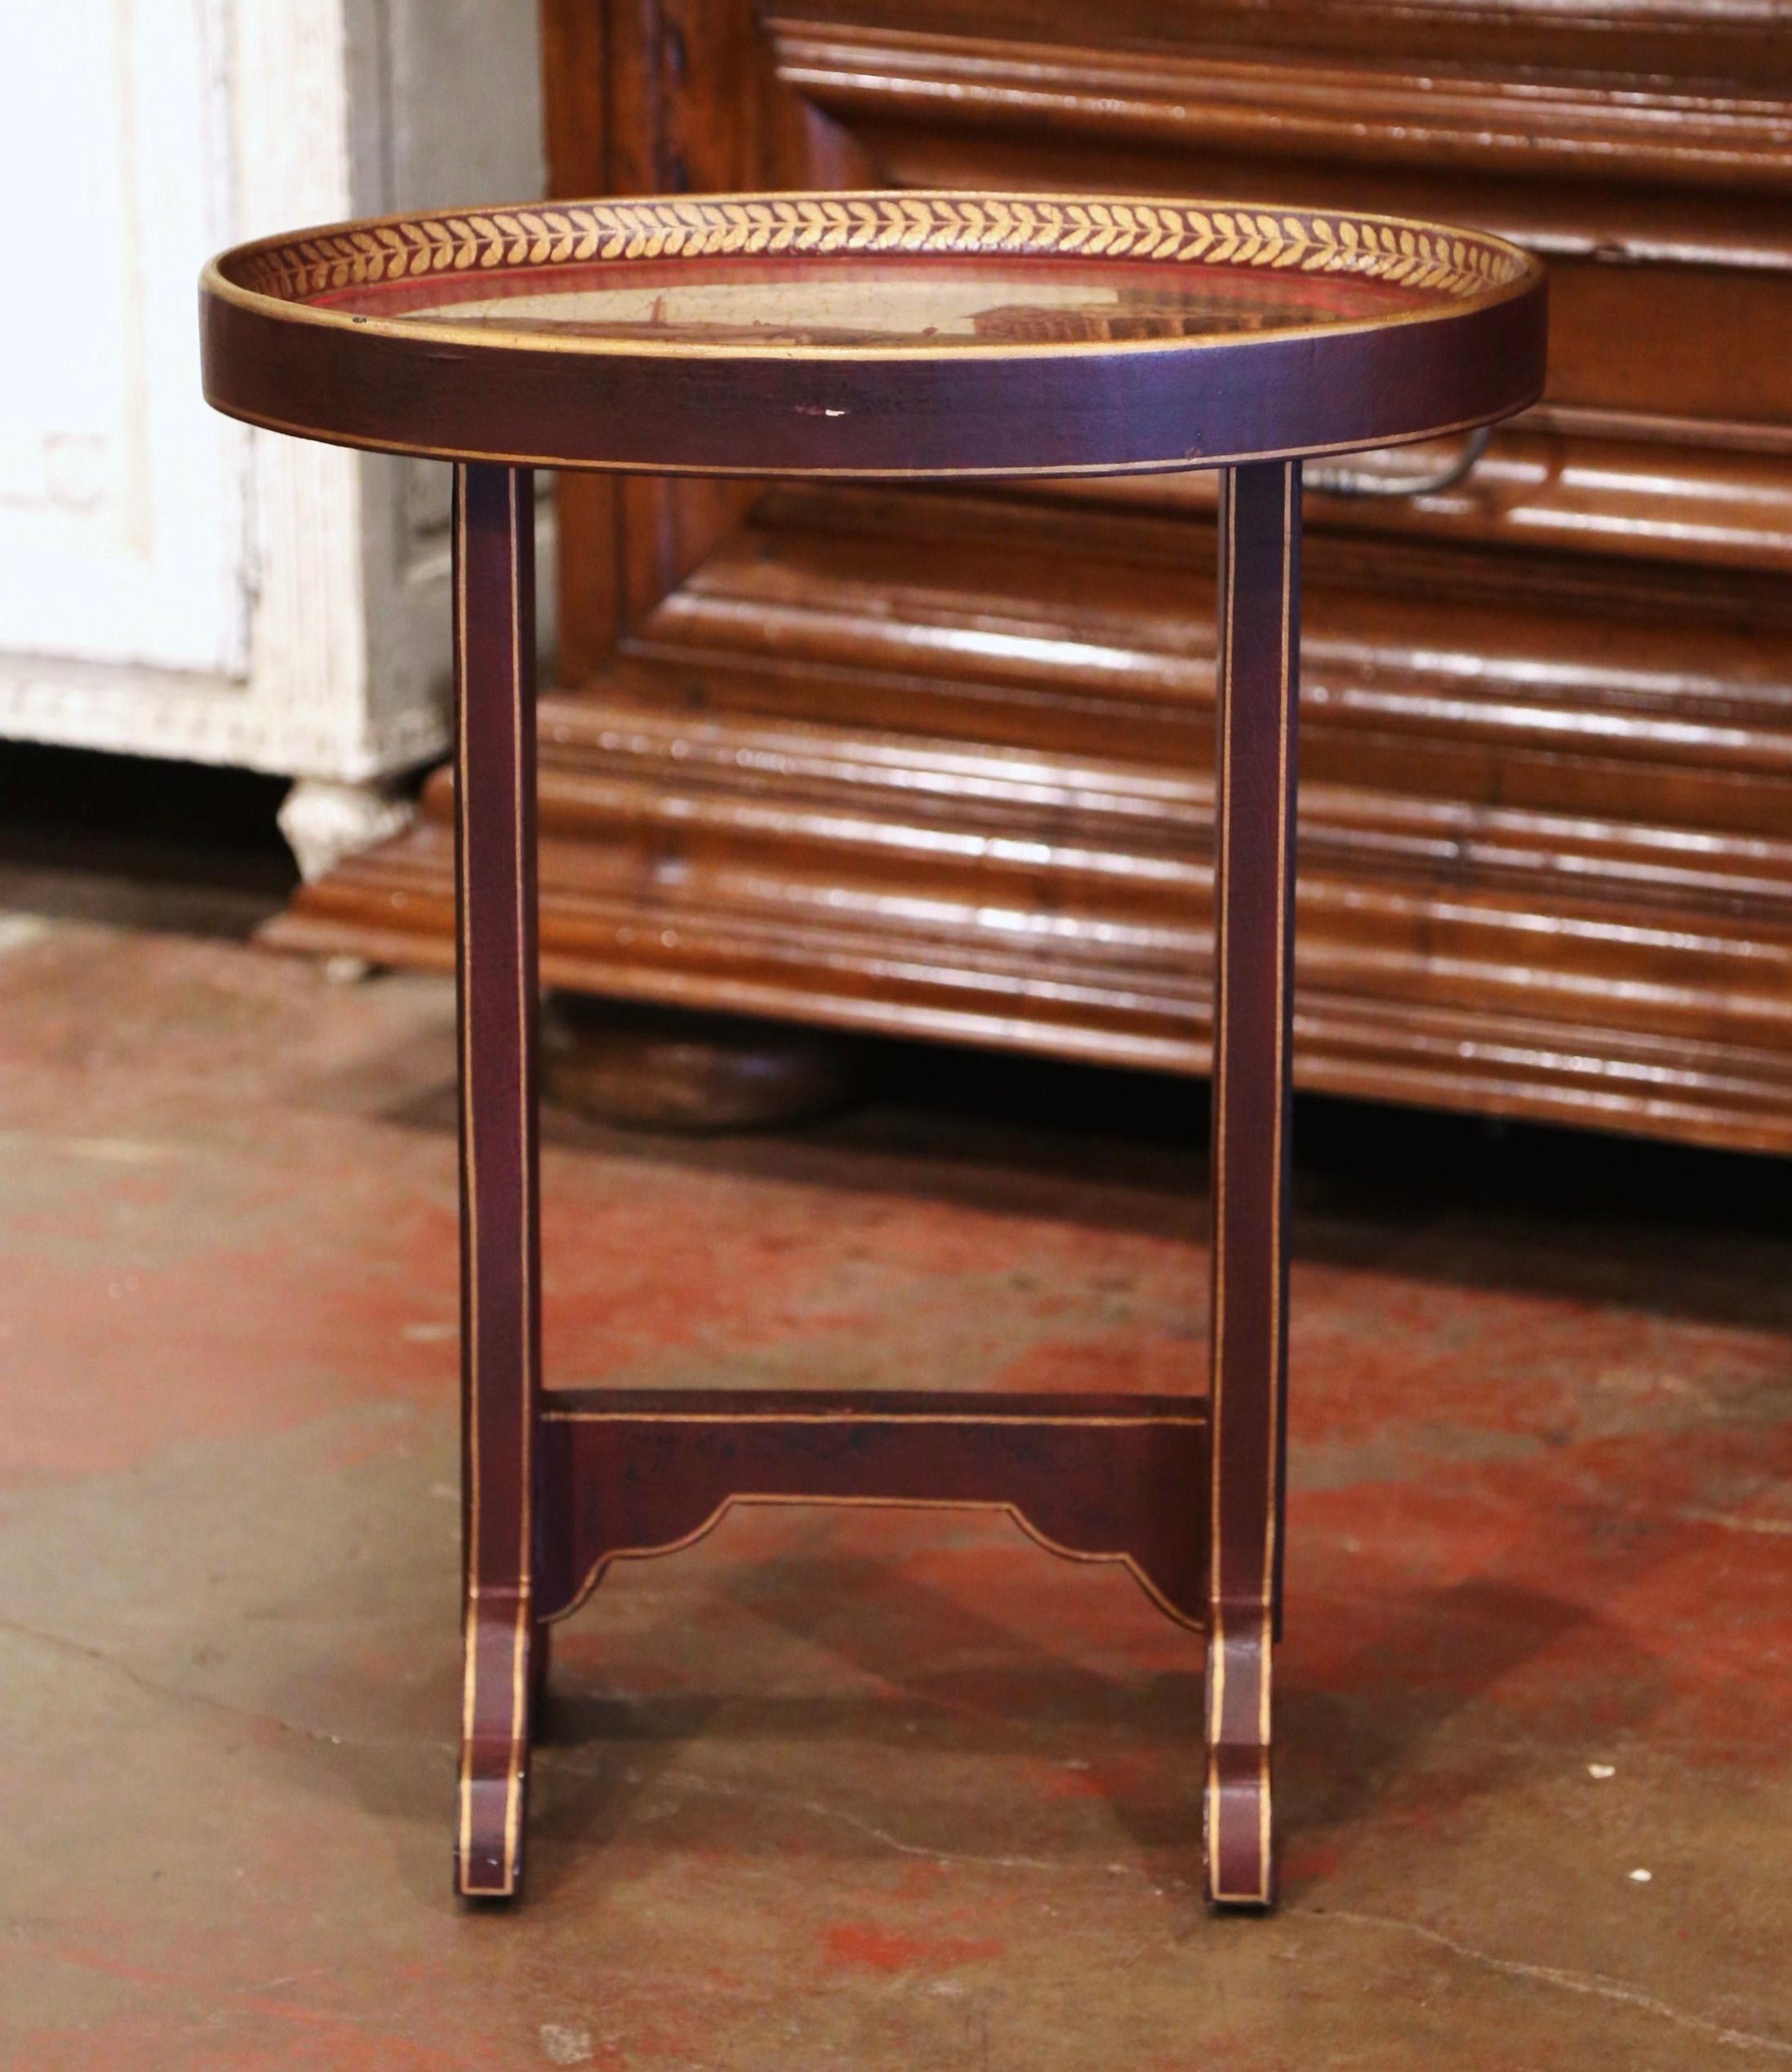 Place this elegant side table next to a chair of sofa. Crafted in Italy circa 2000, the small colorful occasional table stands on a trestle base connected with a stretcher at the base. The oval top with raised edges is decorated with an hand painted